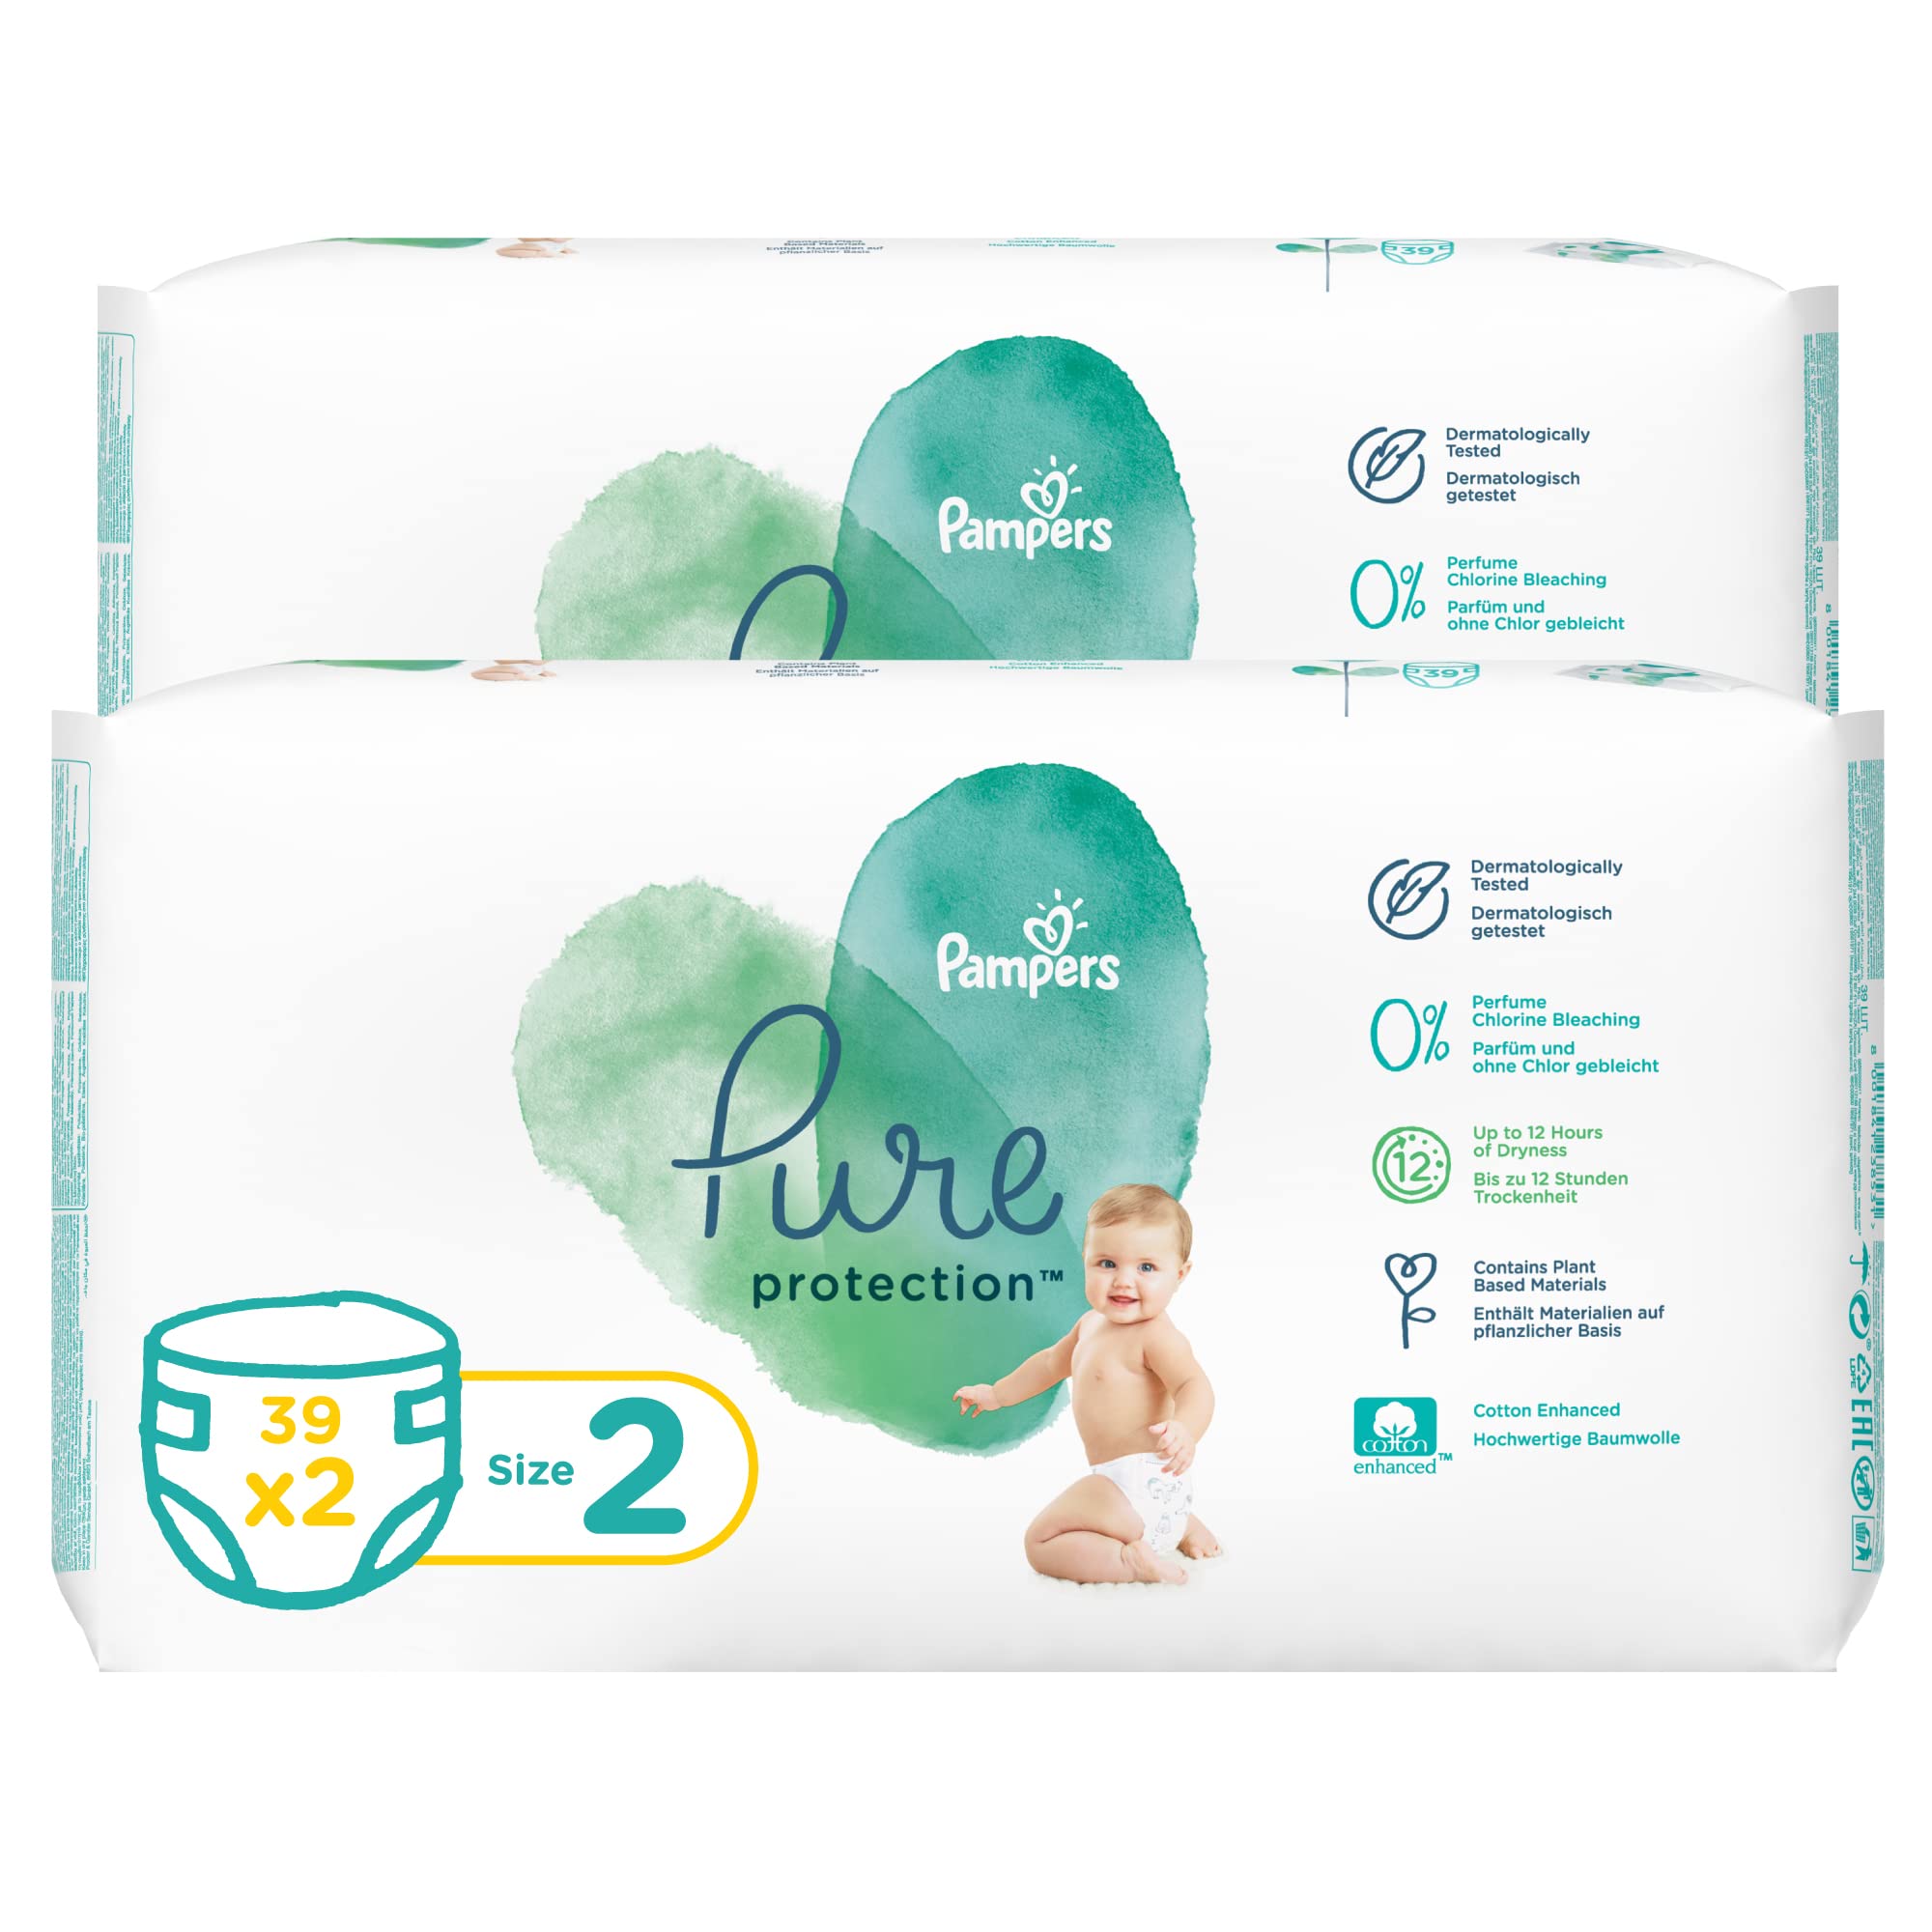 Pampers Pure Protection Dermatologically Tested Diapers, Size 2, 4-8Kg, 78 Diaper Count, Pack Of 2 Pieces